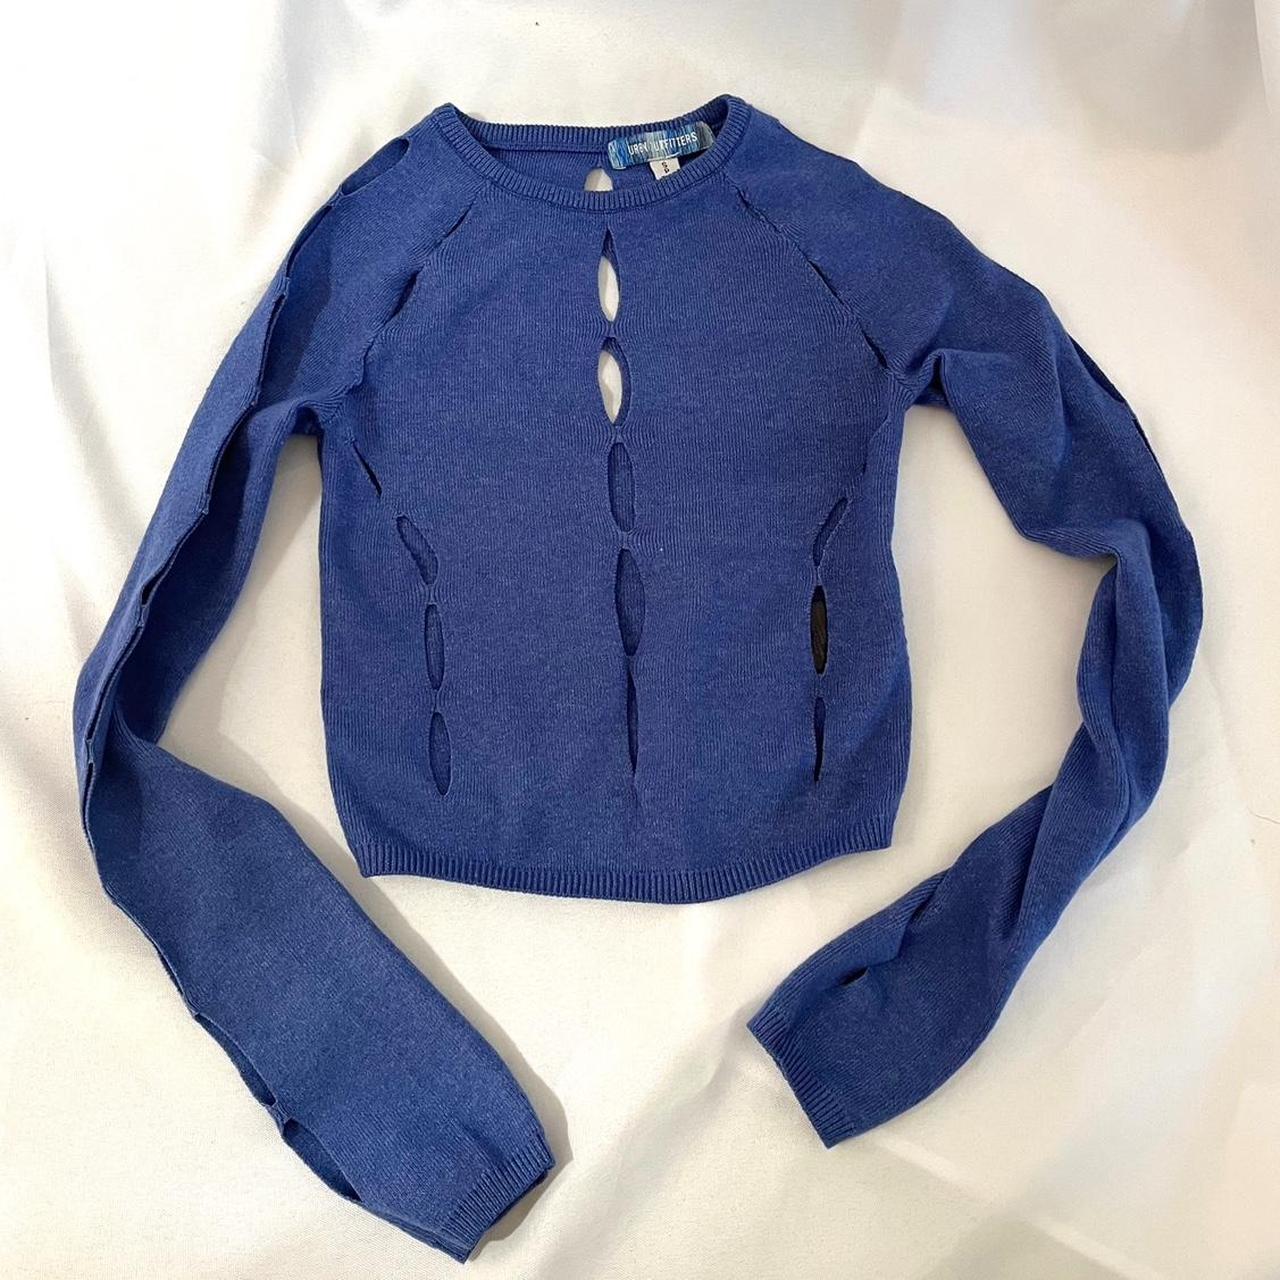 Tie Up Ribbed Cropped Cardigan Top Blue